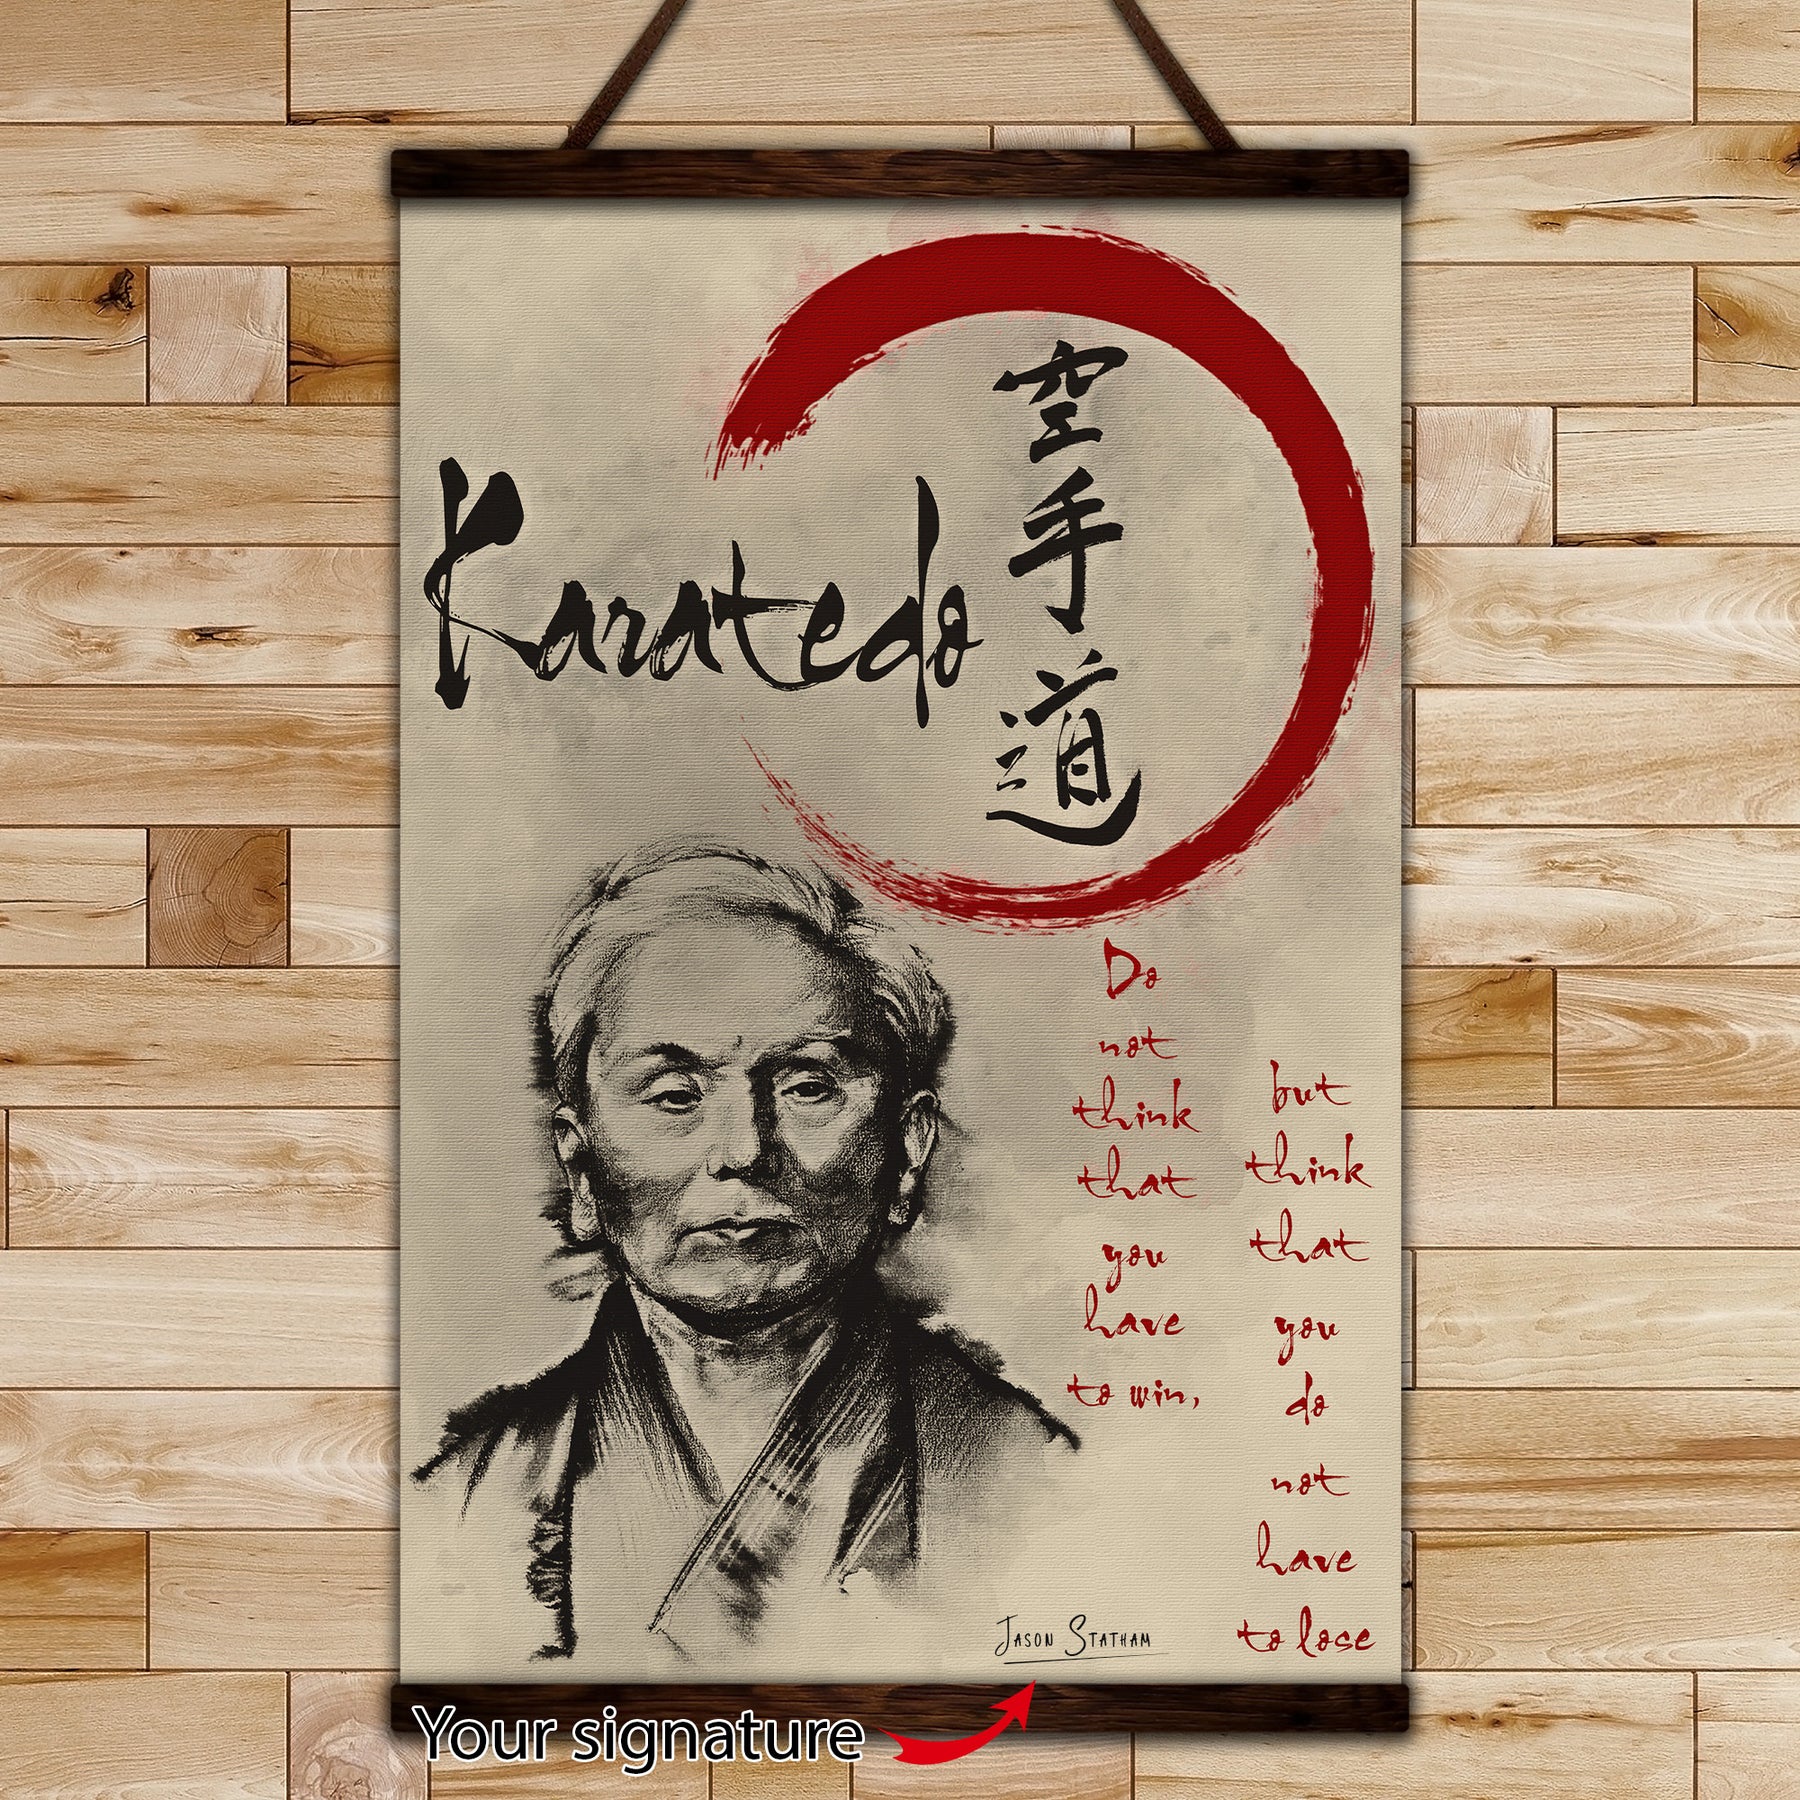 KA003 - Do Not Think That You Have To Win -  Gichin Funakoshi - Vertical Poster - Vertical Canvas - Karate Poster